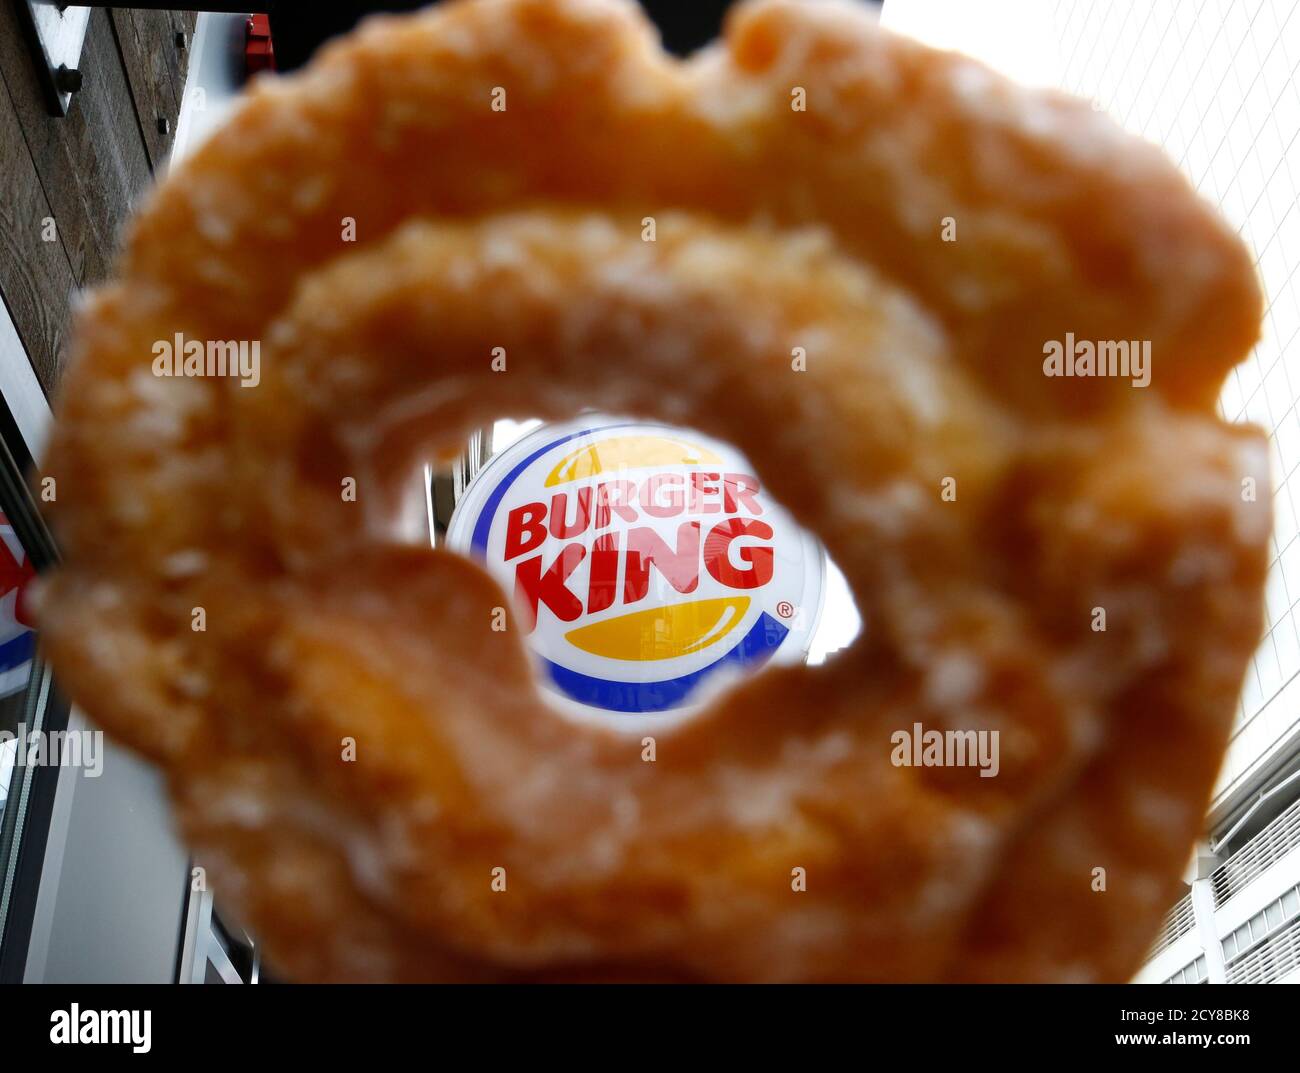 The Burger King logo is seen through a Tim Horton's doughnut hole in a photo illustration outside a restaurant in Toronto August 29, 2014. Burger King's proposed $11.5 billion acquisition of Canada's Tim Hortons may offer big tax benefits to the U.S. fast food chain but the real tax winner is likely to be its controlling shareholder, 3G Capital. The New York investment firm is not only deferring a capital gains tax hit in the U.S. because of the deal structure, but is also poised to reap a multitude of dividend tax and other benefits by moving Burger King's domicile to Canada, tax experts on b Stock Photo